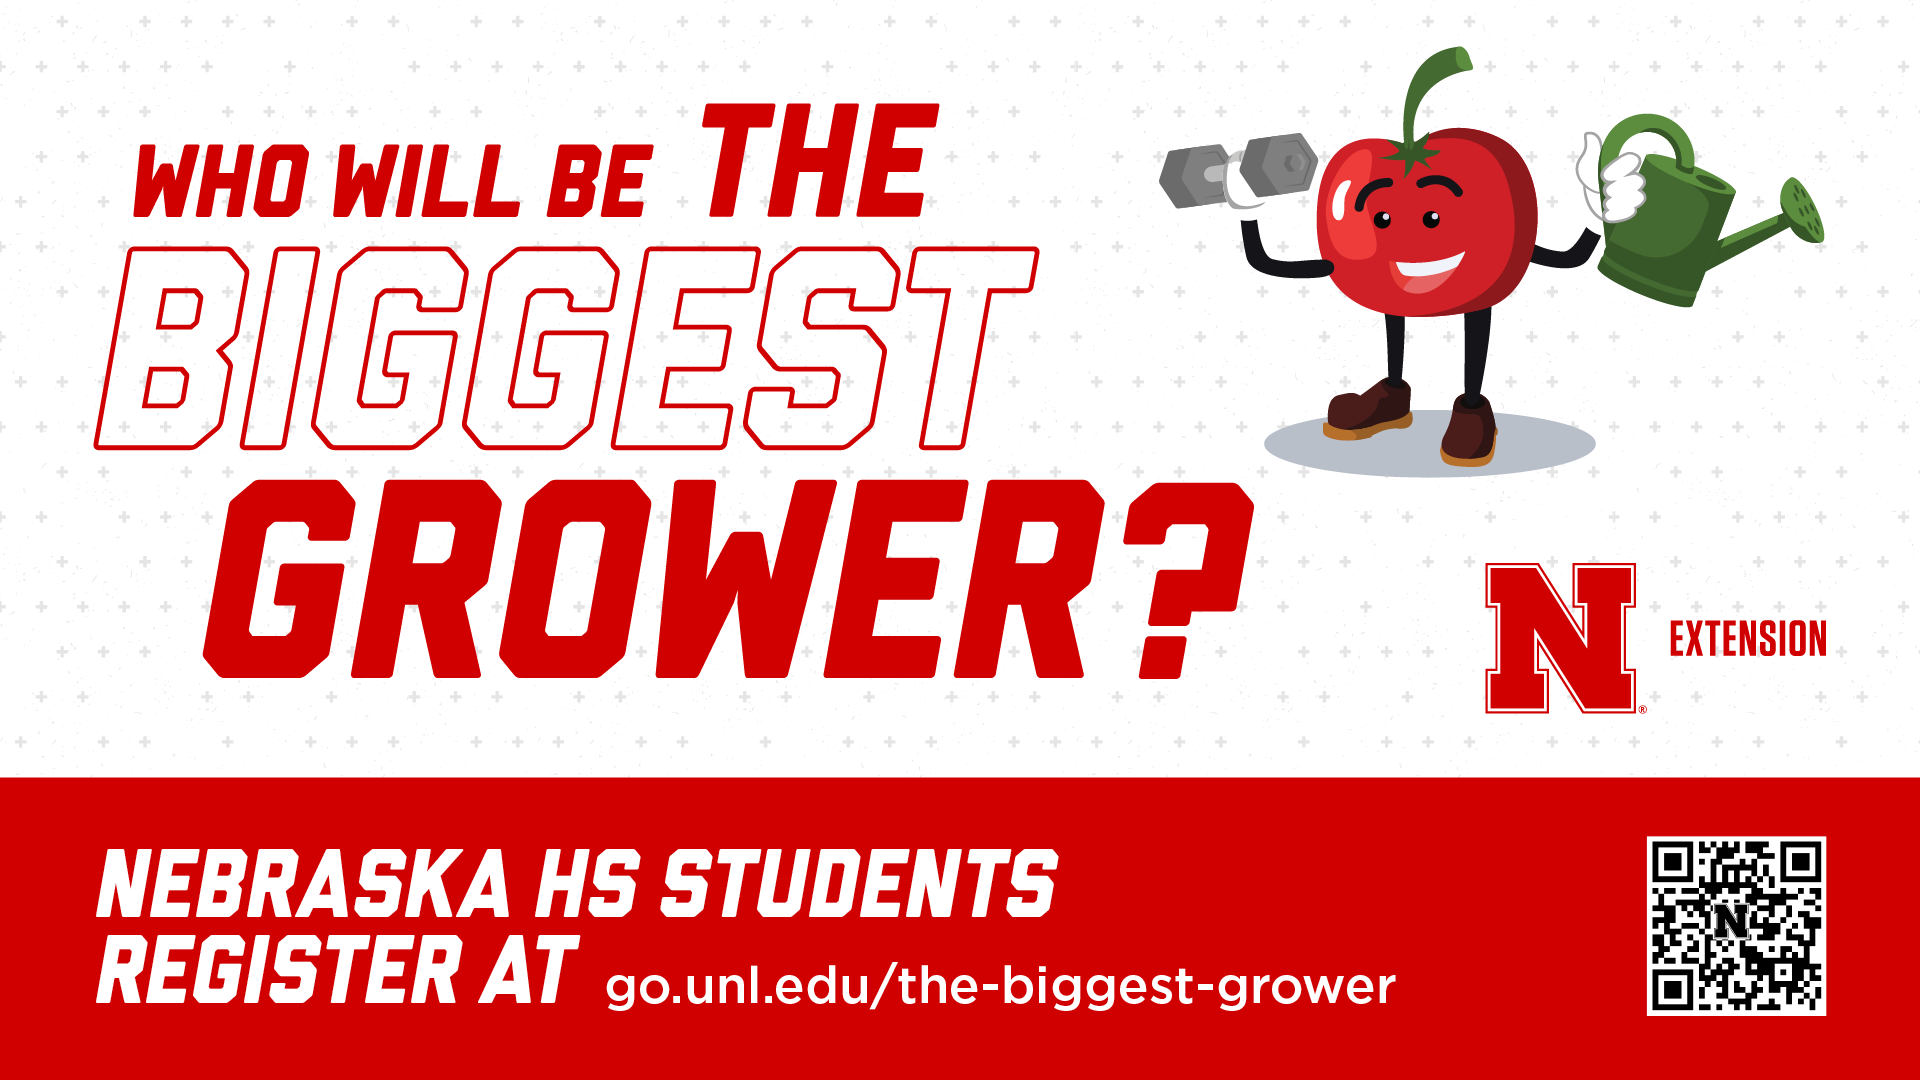 Registration for The Biggest Grower competition extended to June 1.